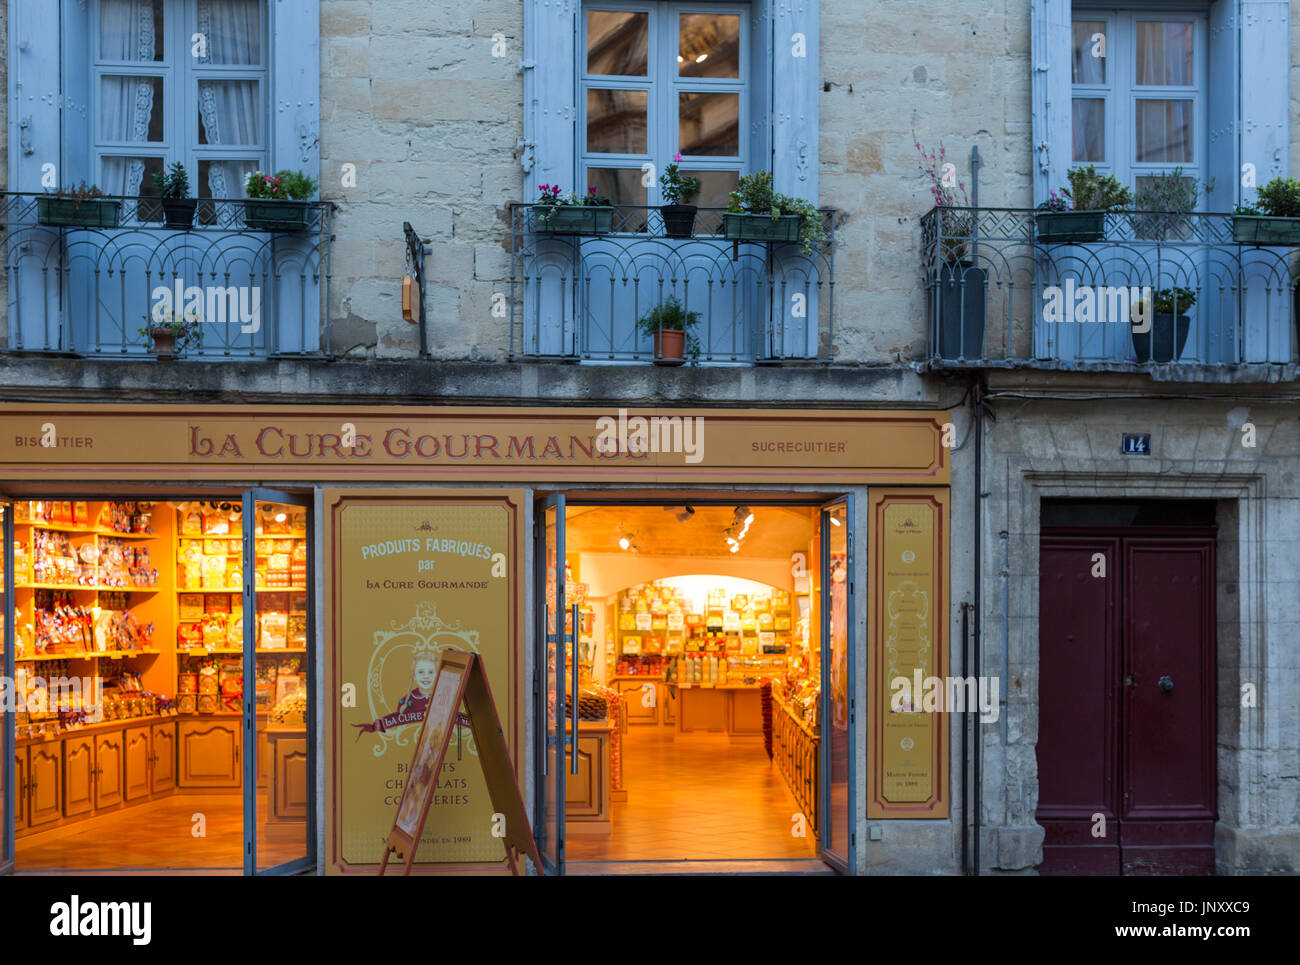 Uzes, Gard department, southern France - October 8, 2015: Chocolate and cookie shop in Uzes, Gard department, southern France. Stock Photo